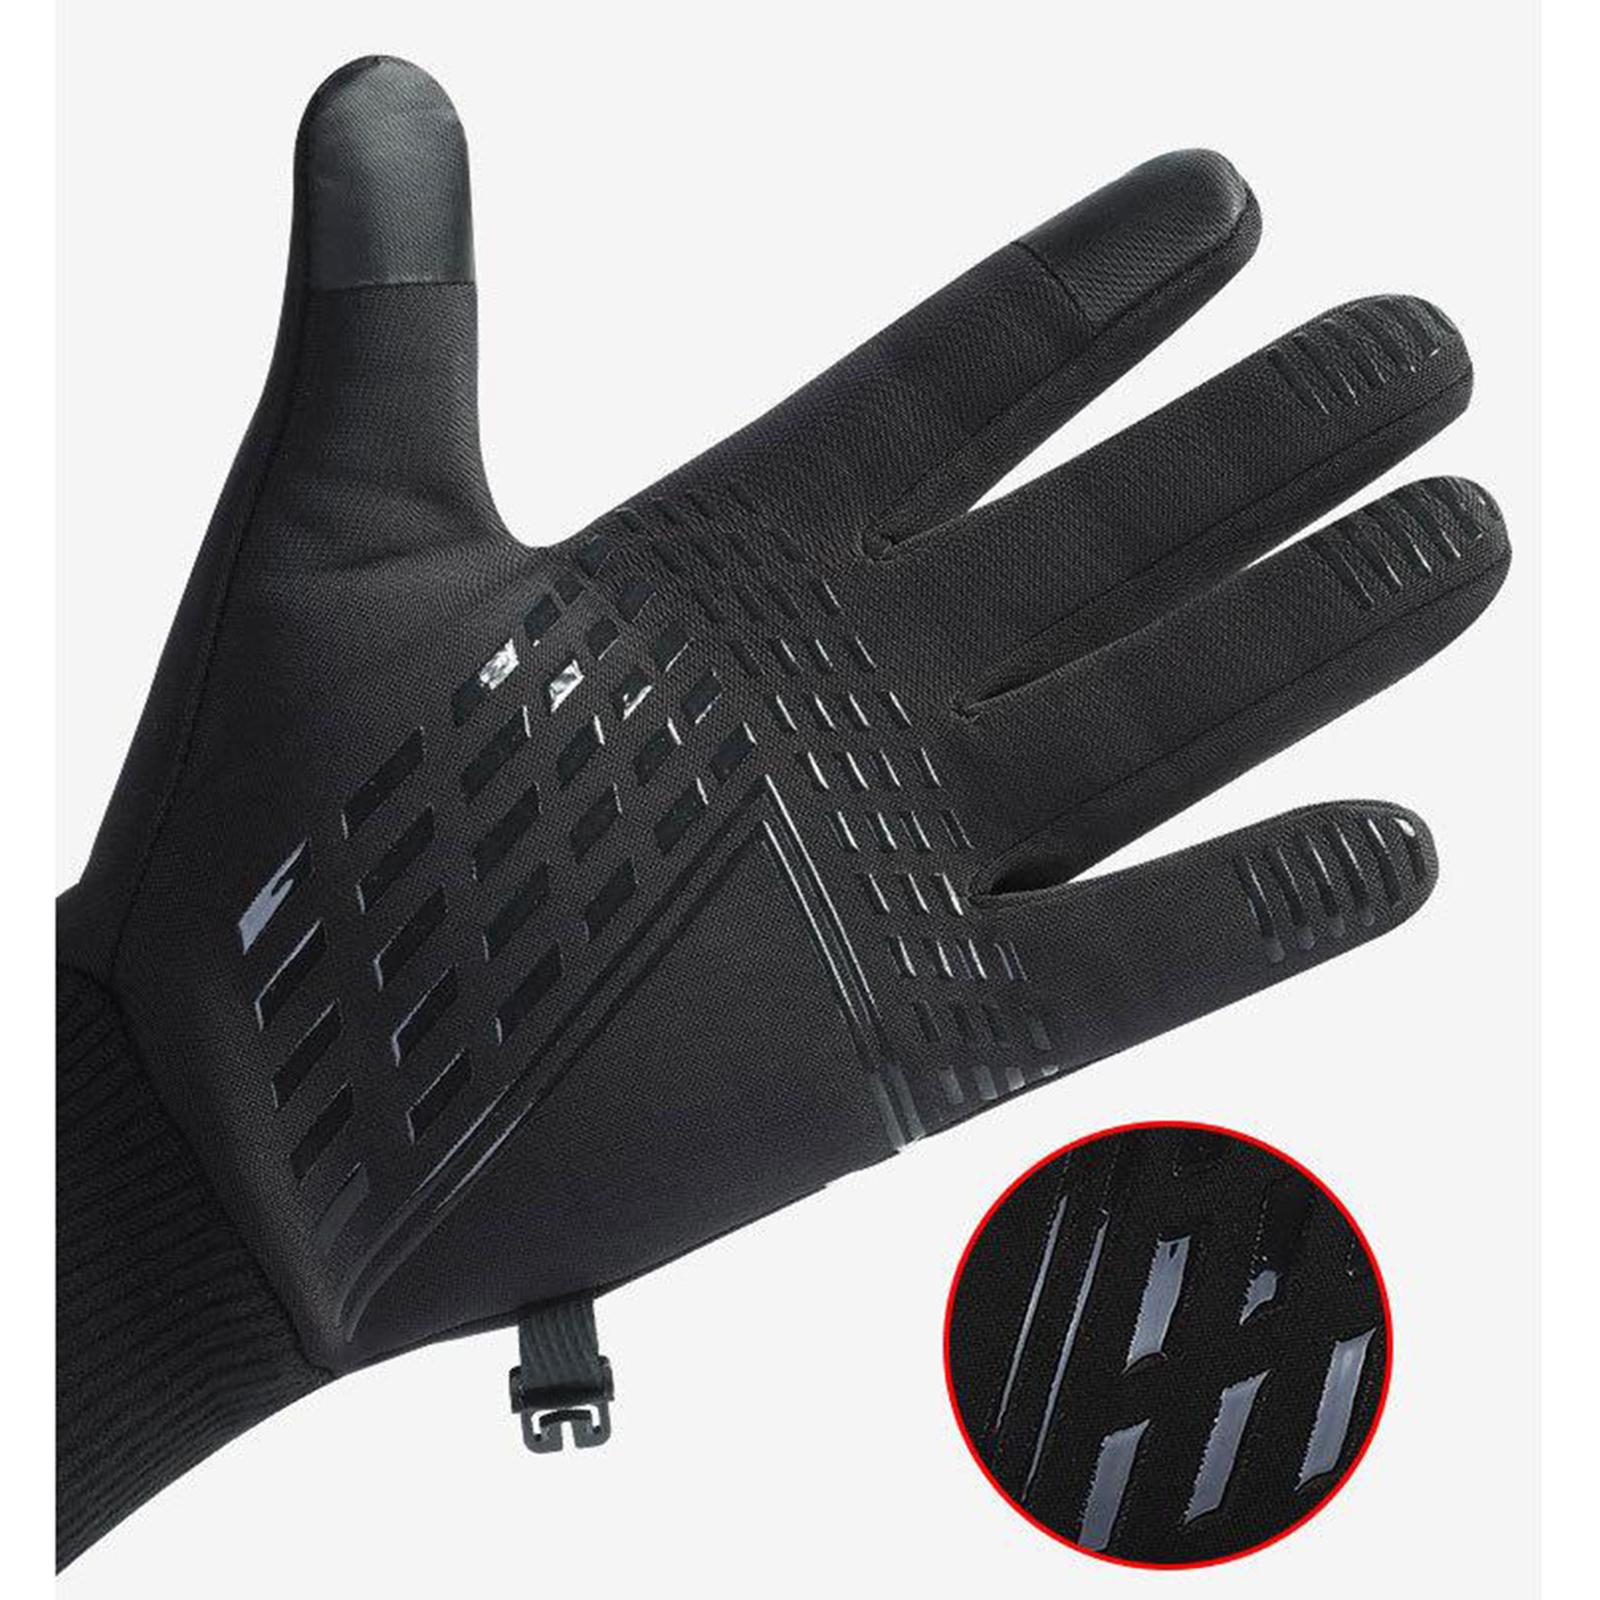 Winter Outdoor Cycling Hiking Sports Gloves Touch Screen XL Gray K111